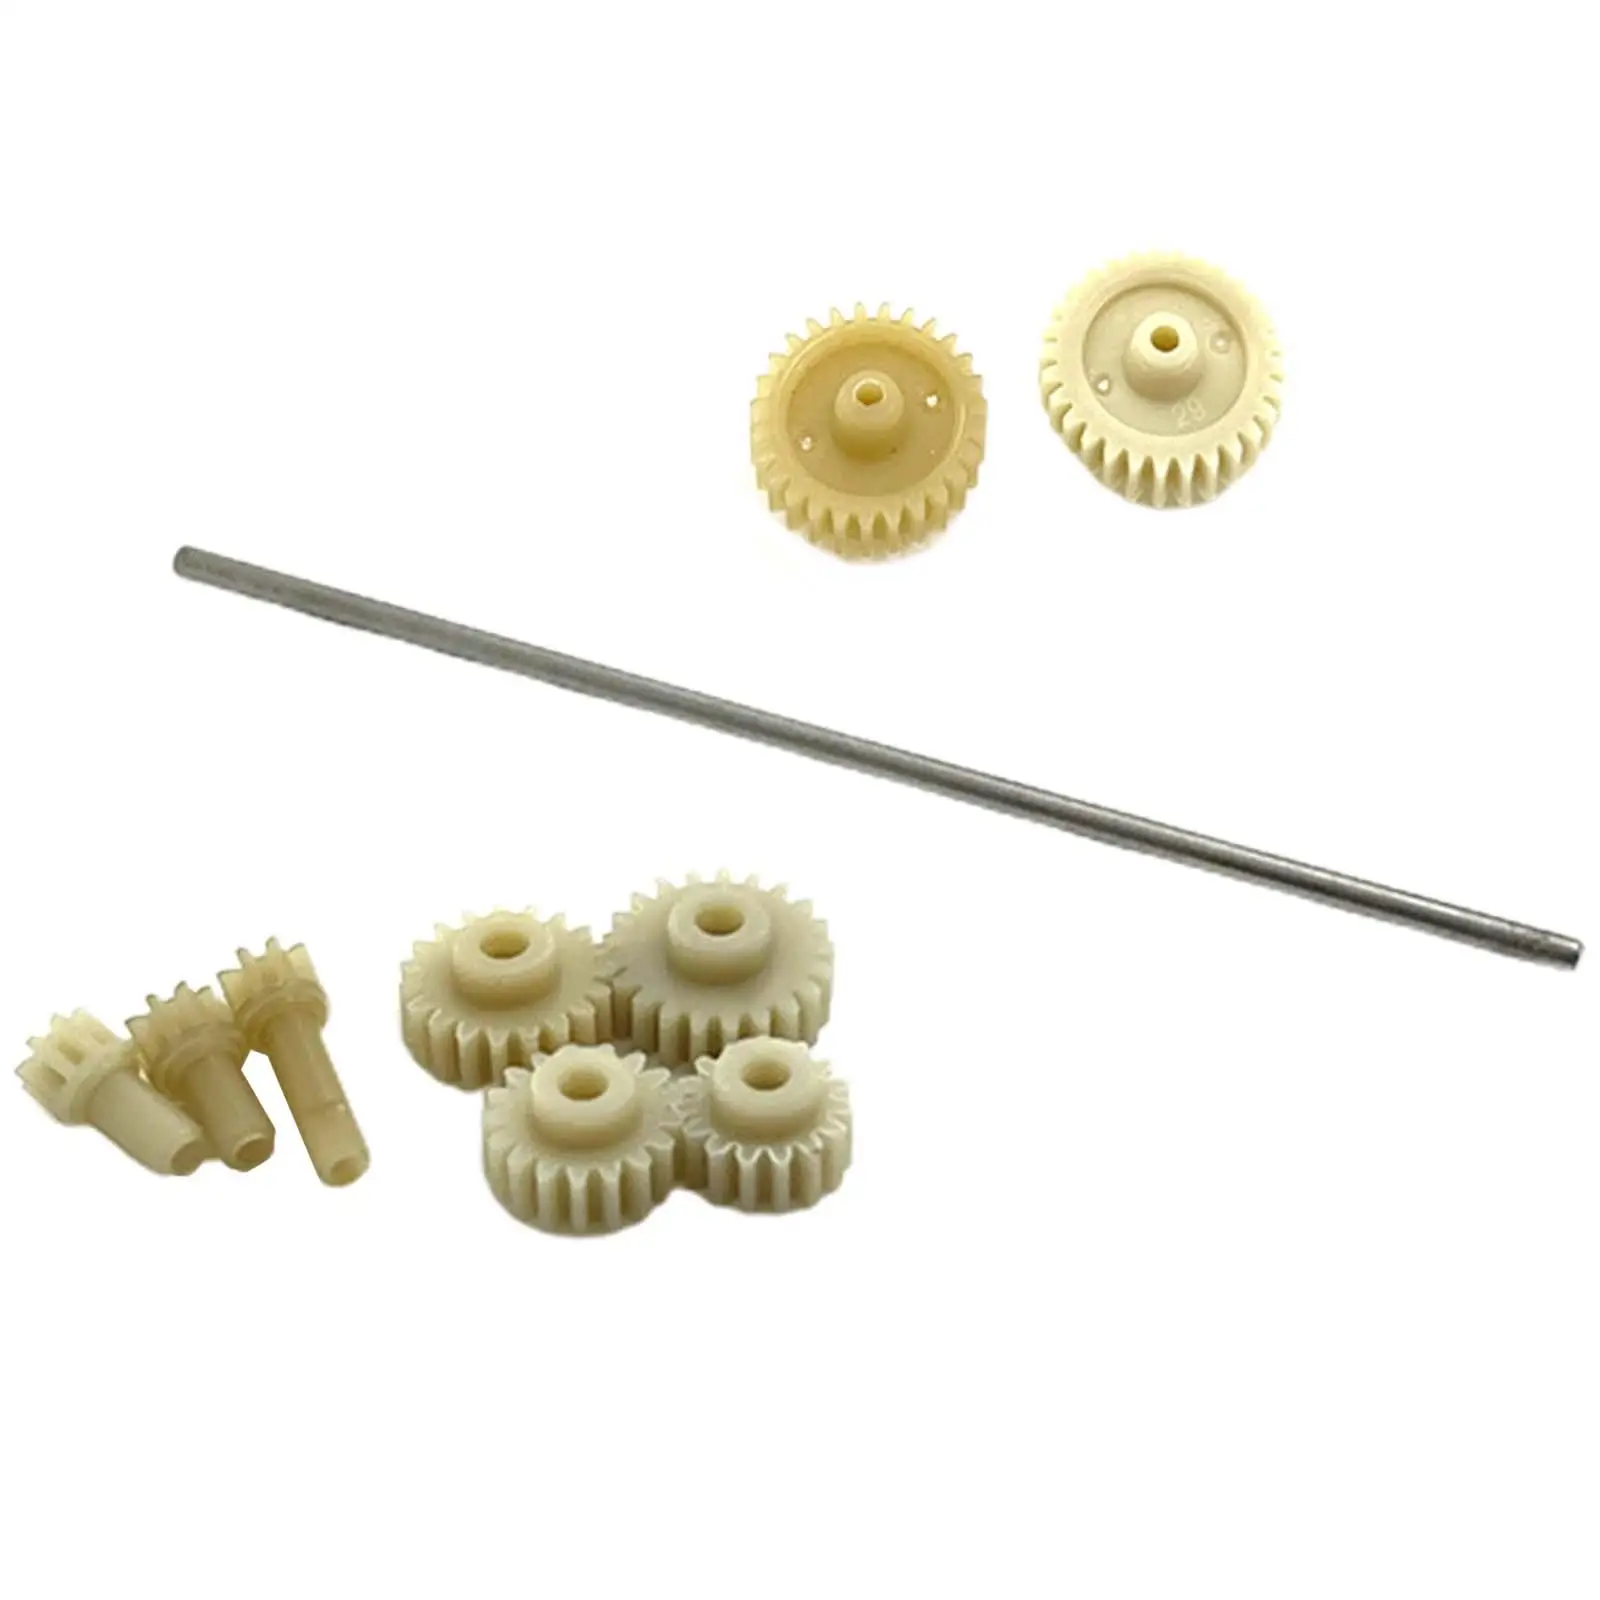 

RC Car Gears and Shaft Set Metal Center Drive Shaft for Wltoys 1:28 P929 P939 K969 K979 K989 284131 284161 284010 RC Car